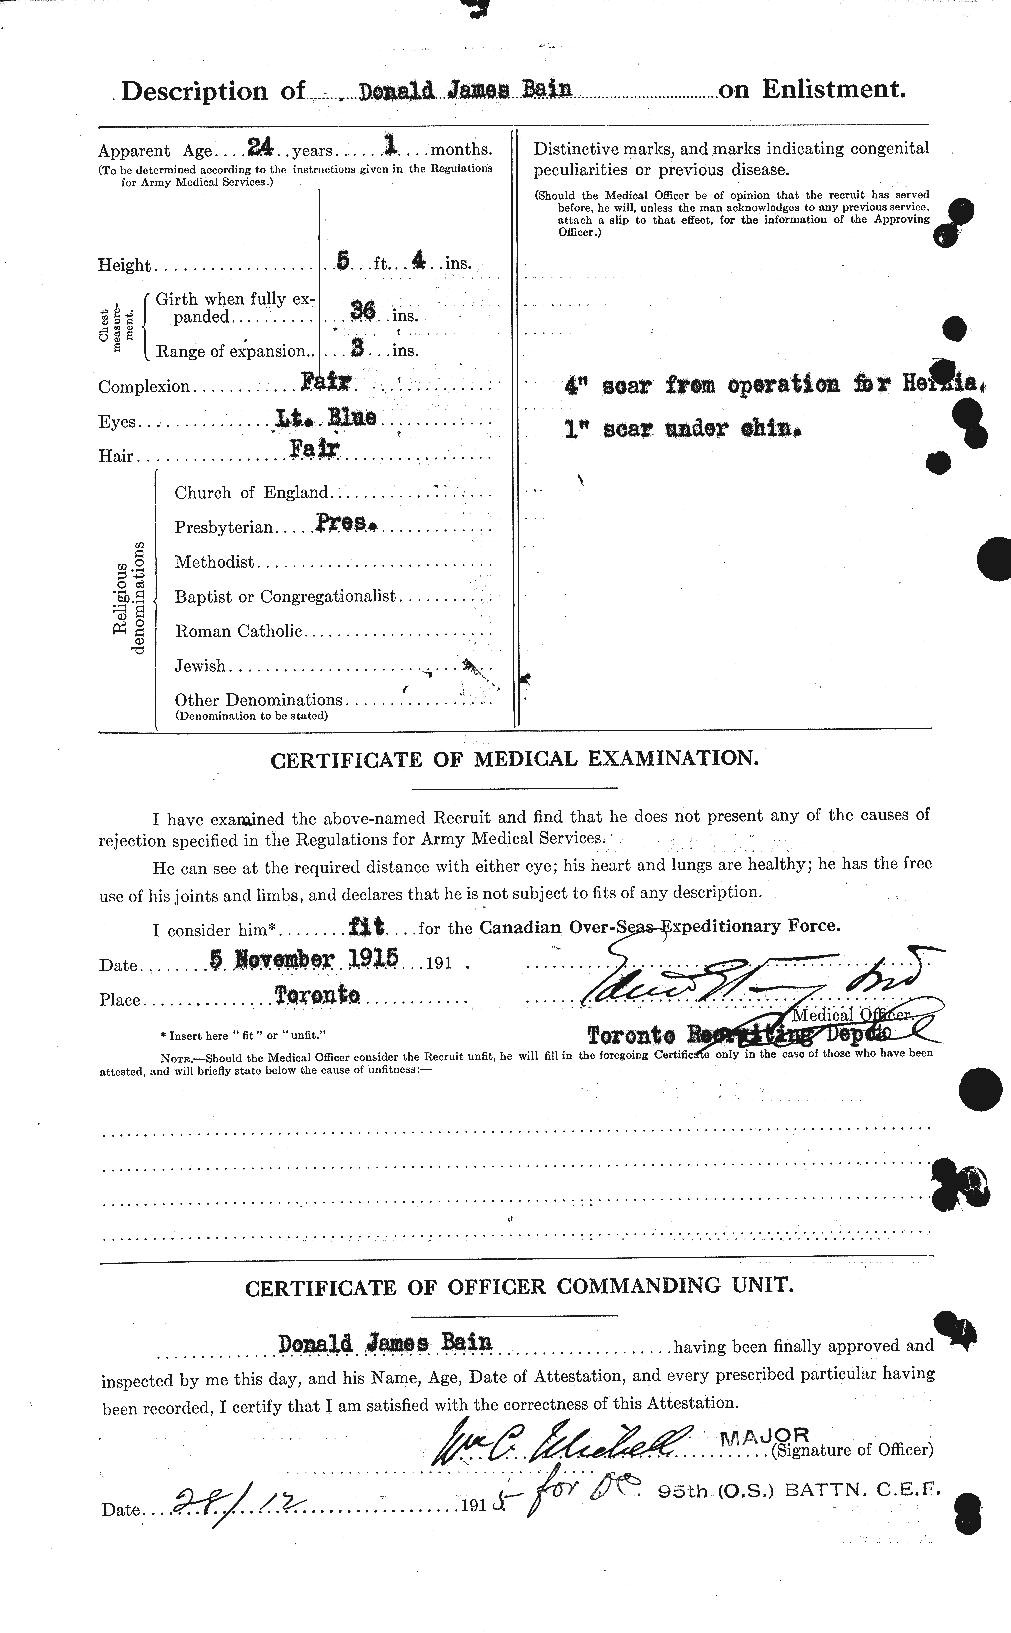 Personnel Records of the First World War - CEF 226145b